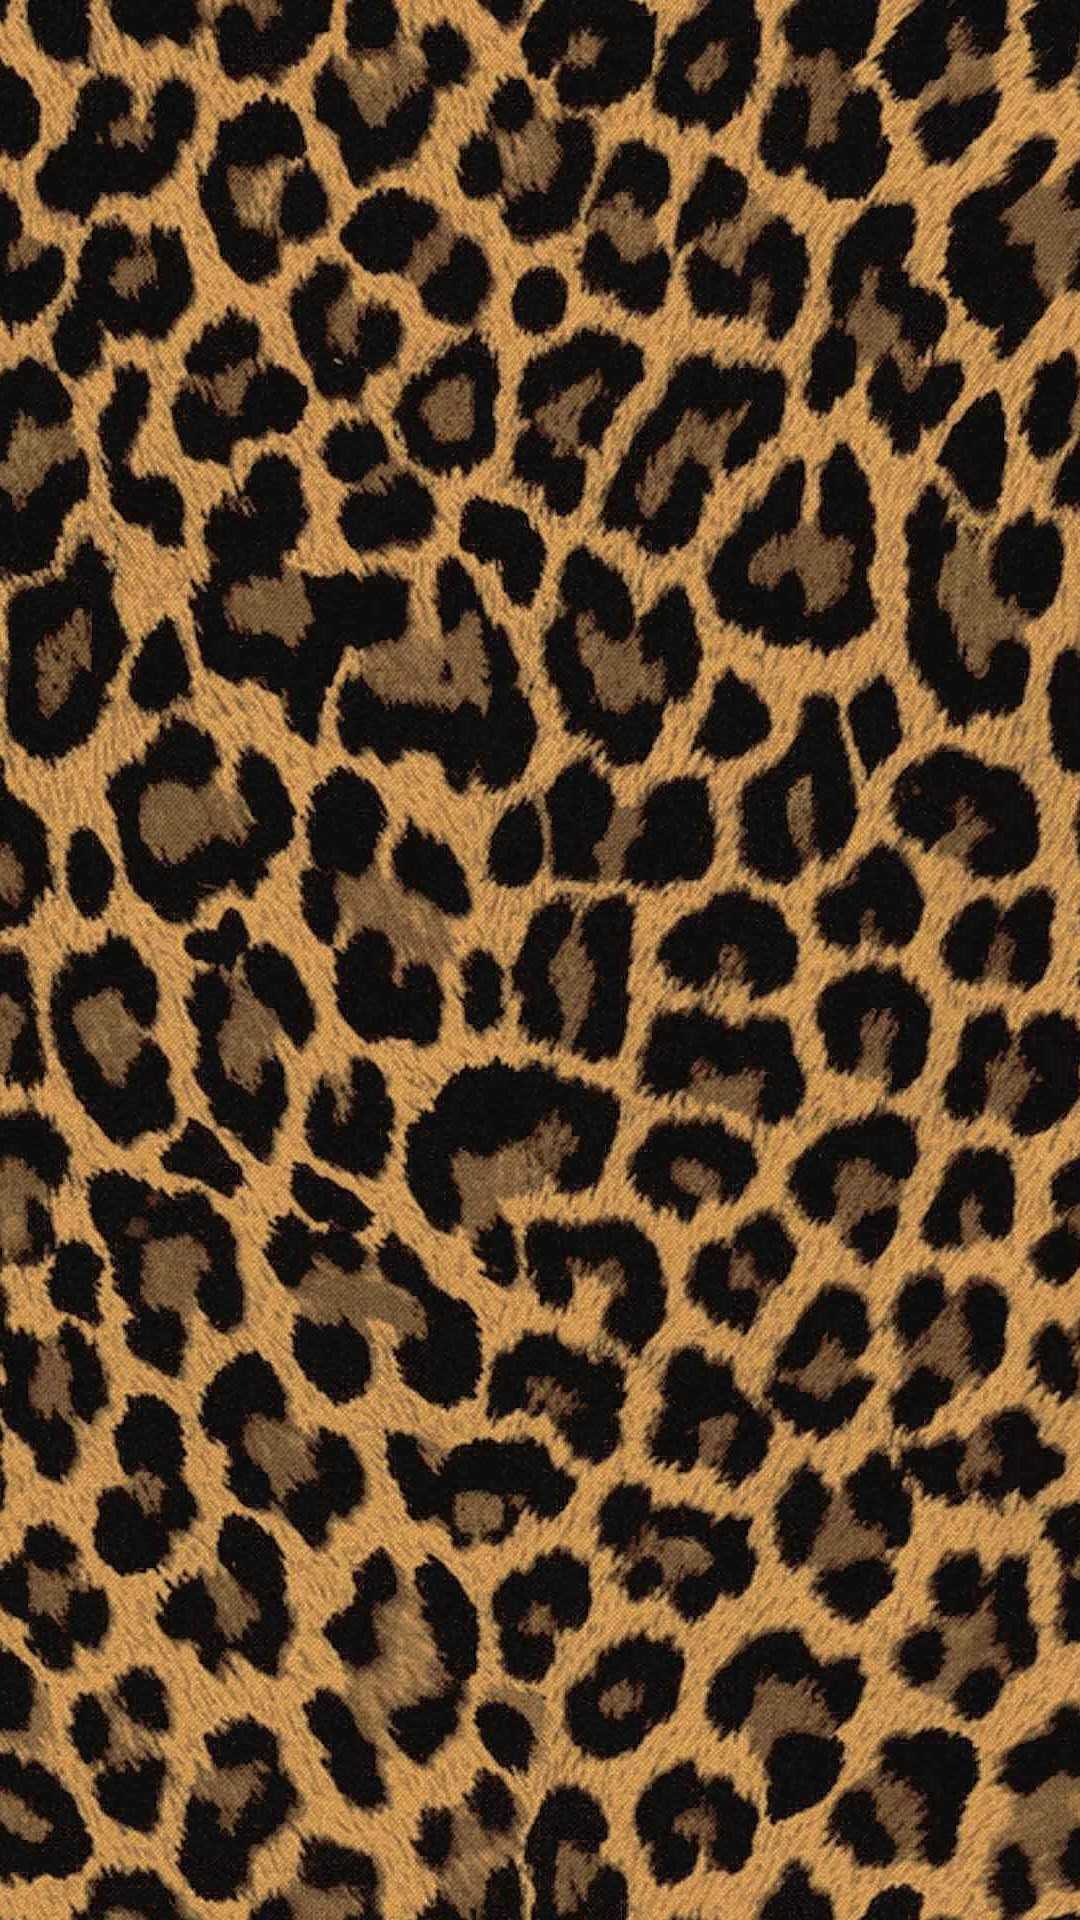 iPhone Leopard Print Wallpapers.